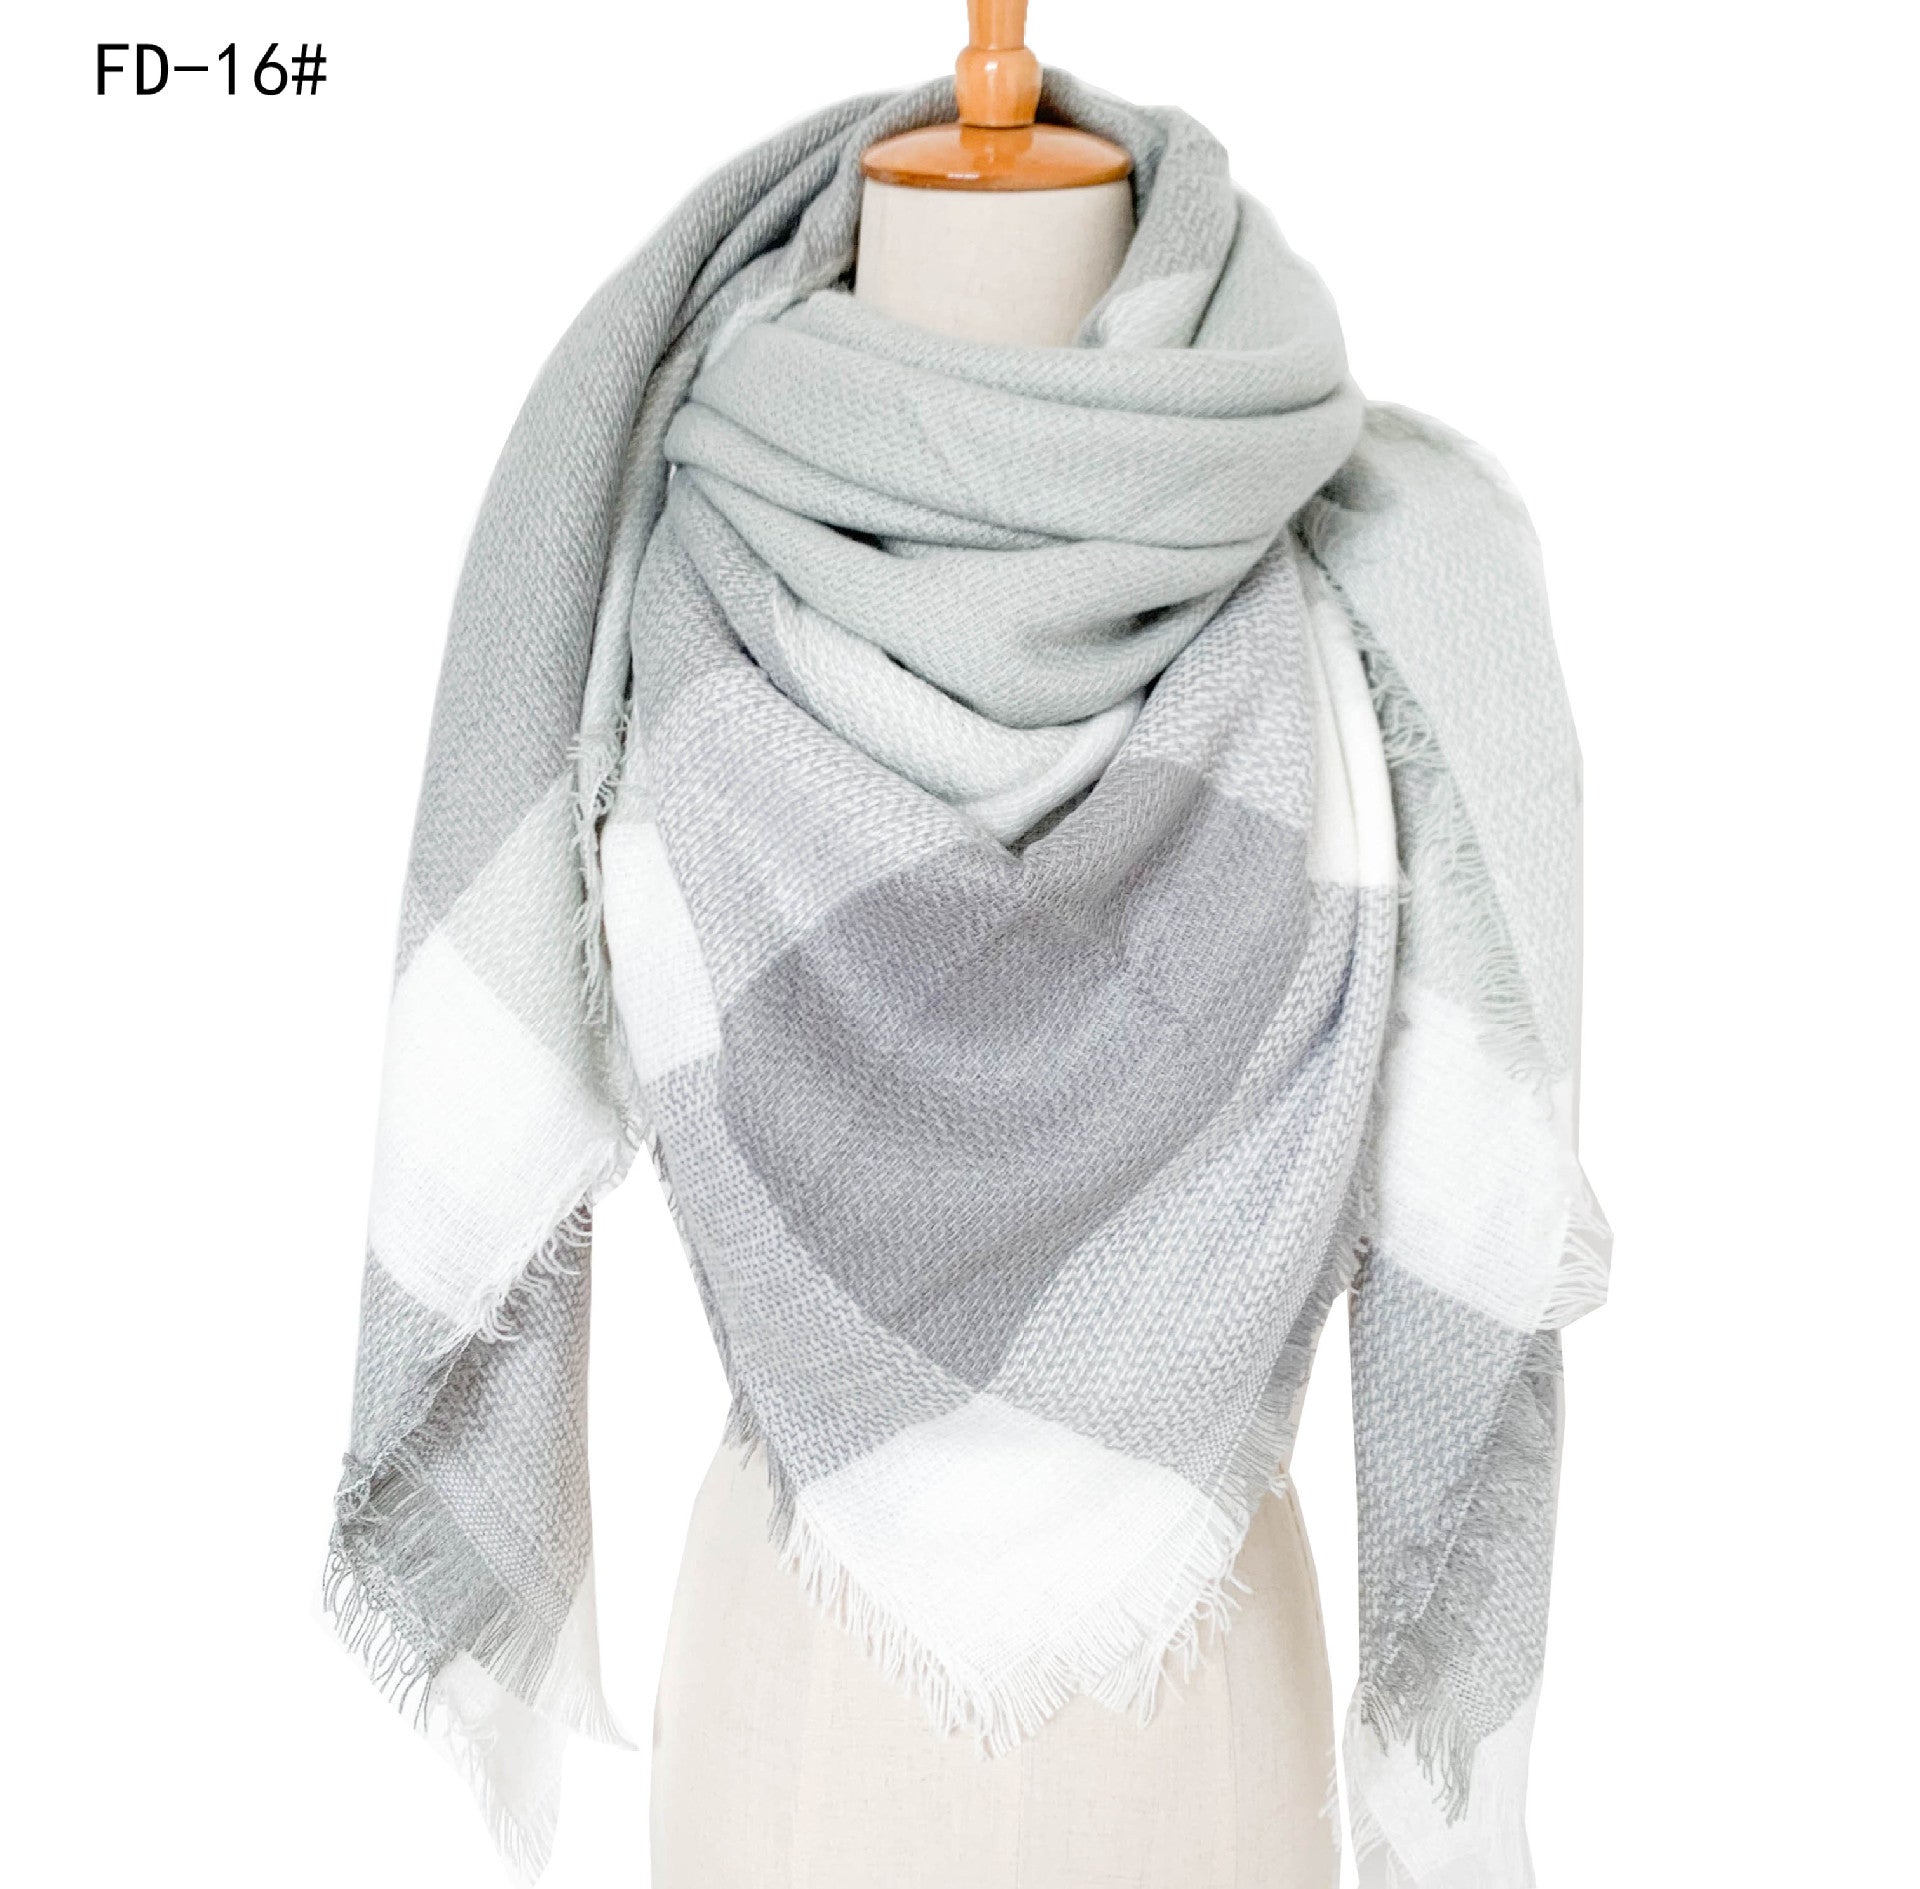 Winter Warm Plaid Scarves for Women-Scarves & Shawls-Light Gray-140cm-Free Shipping Leatheretro